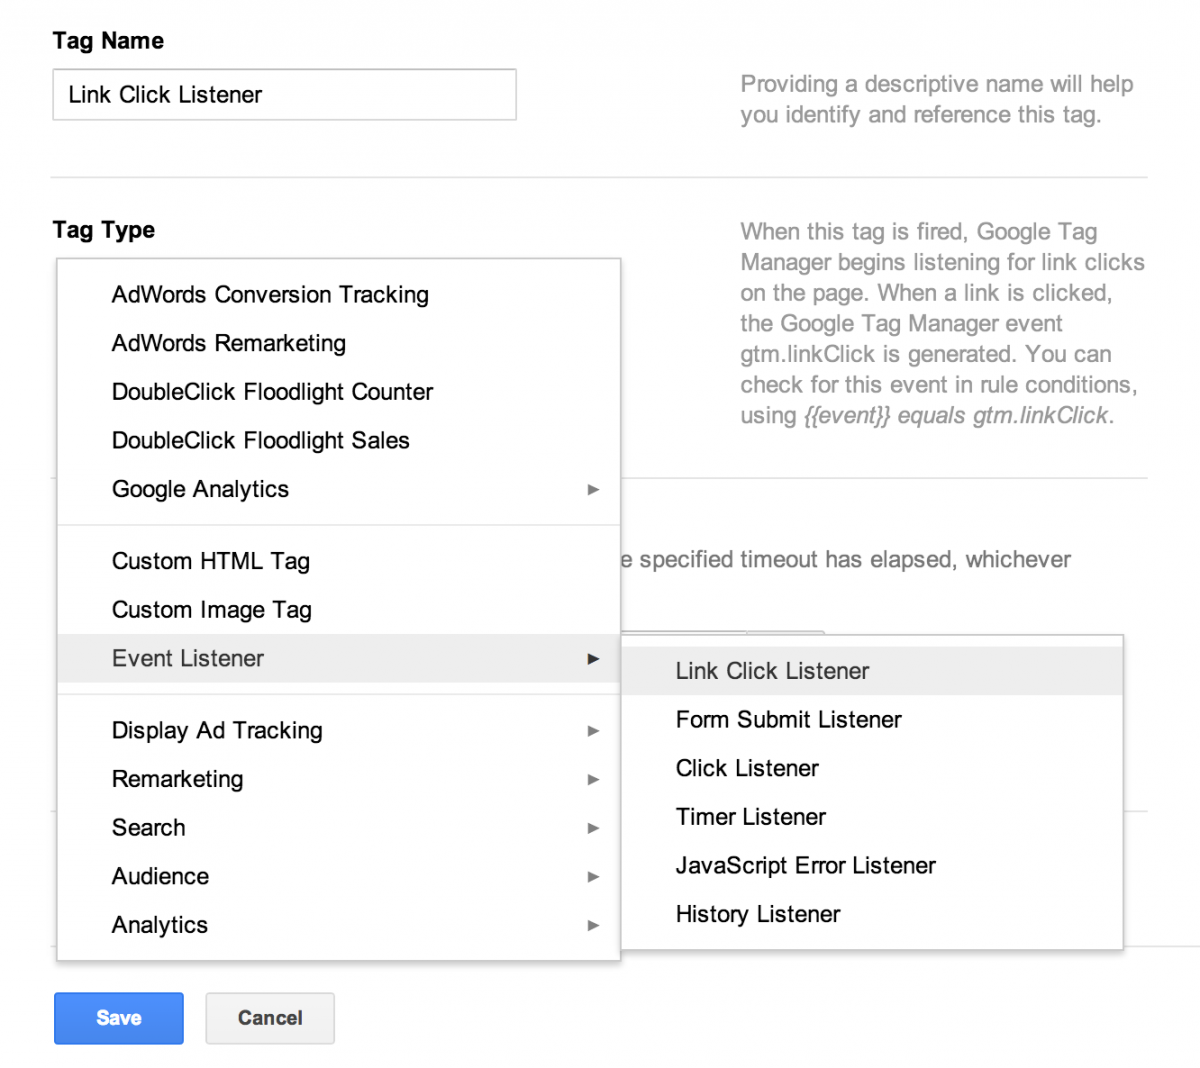 Creating the Link Click Listener Tag.